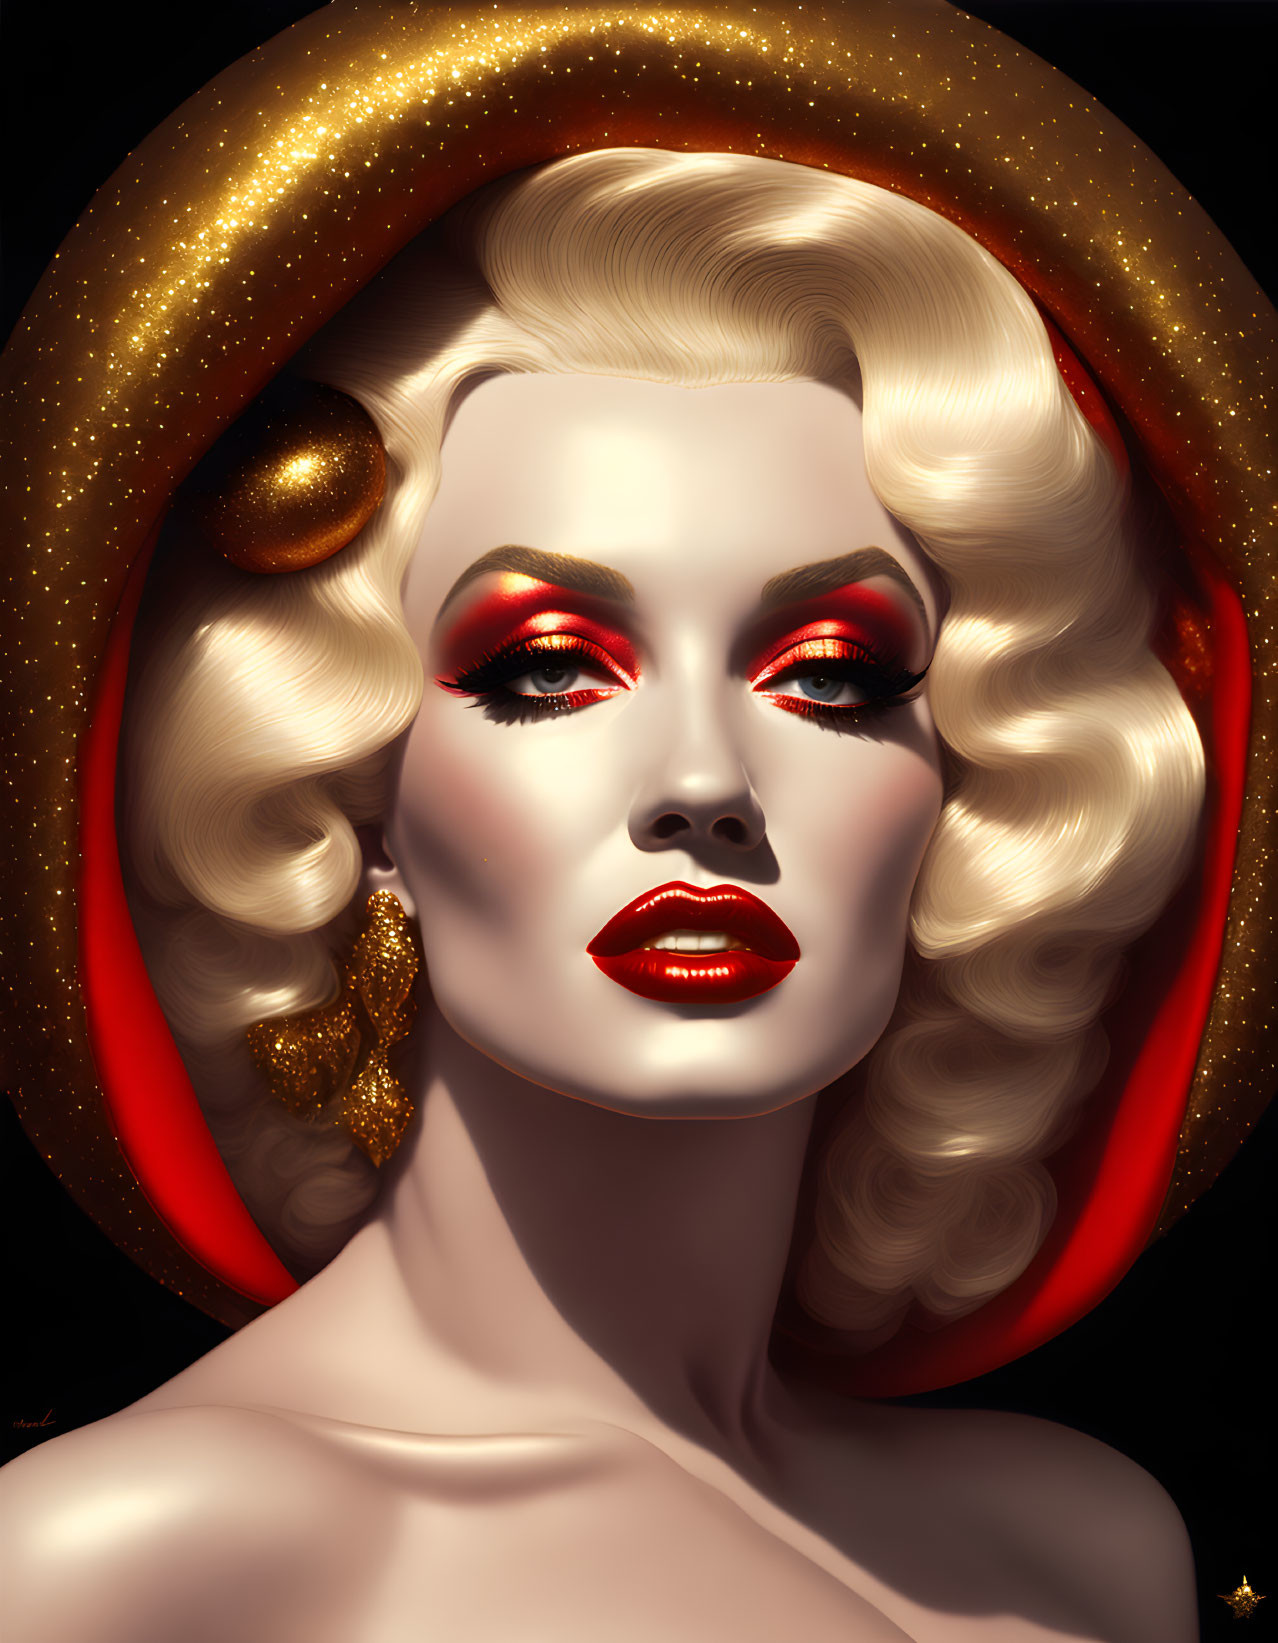 Golden blonde hair woman with bold red lips and eyeshadow on dark background.